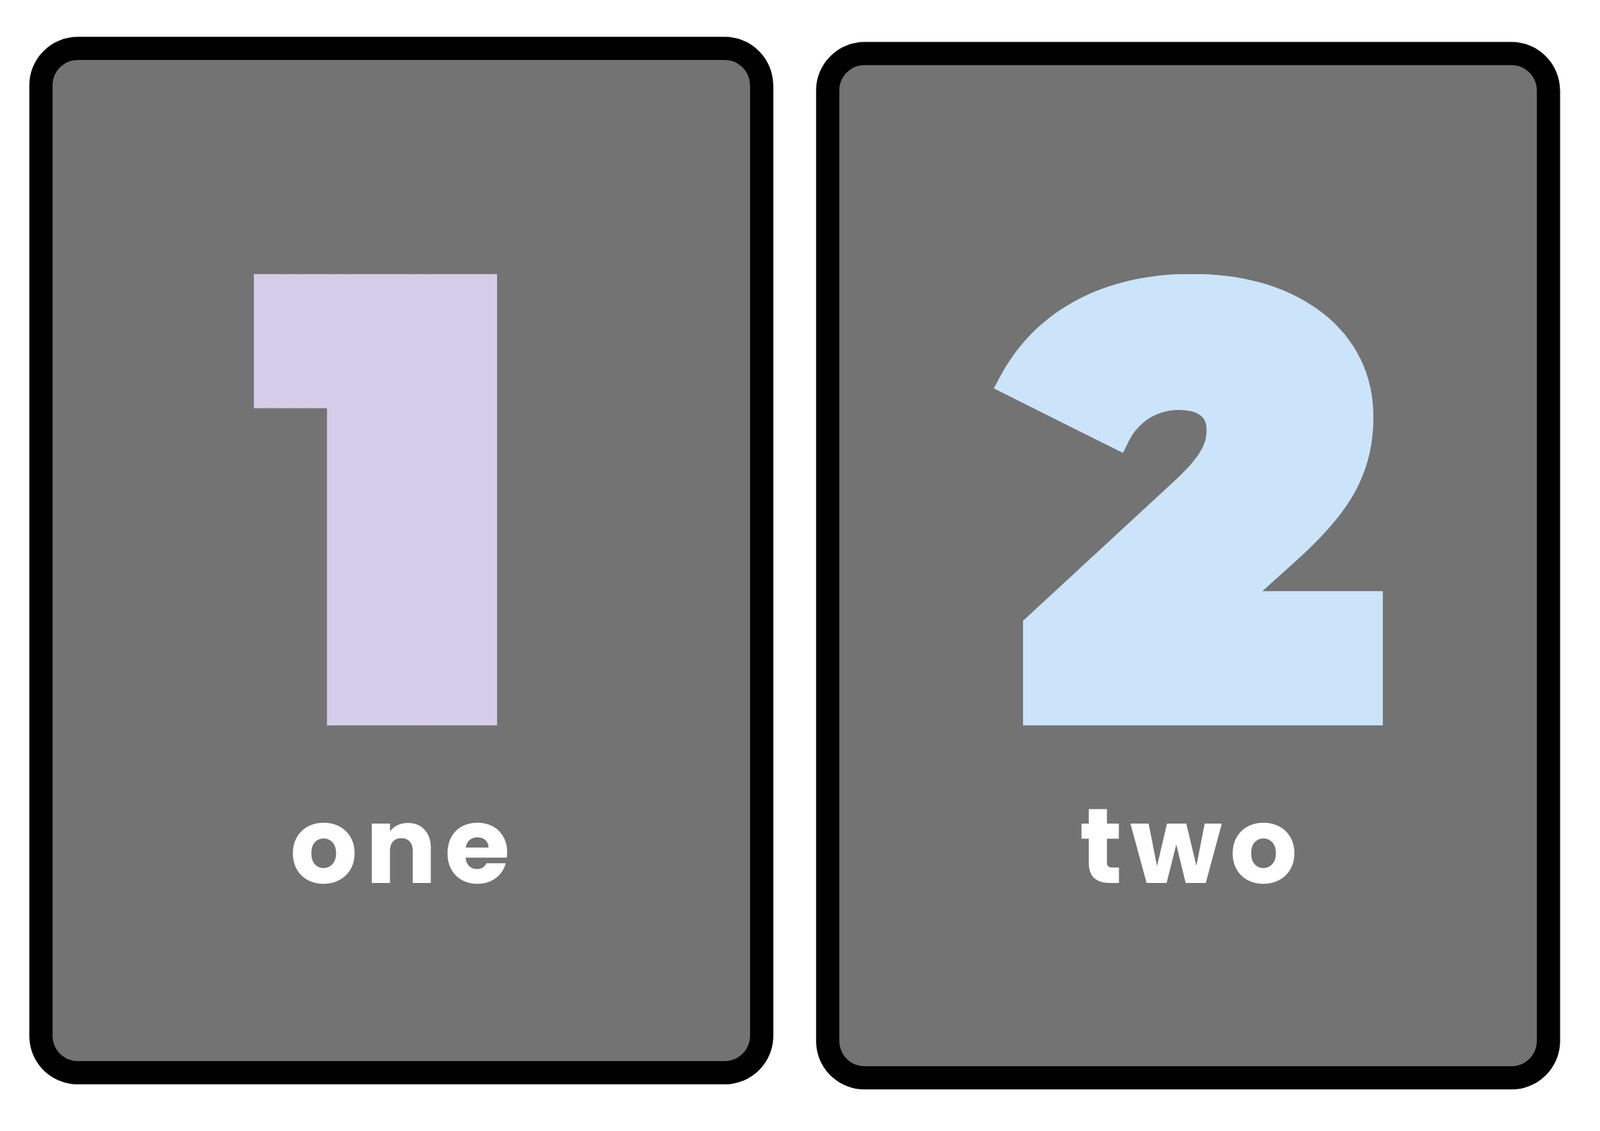 123 Numbers Flashcards PRO – Apps no Google Play